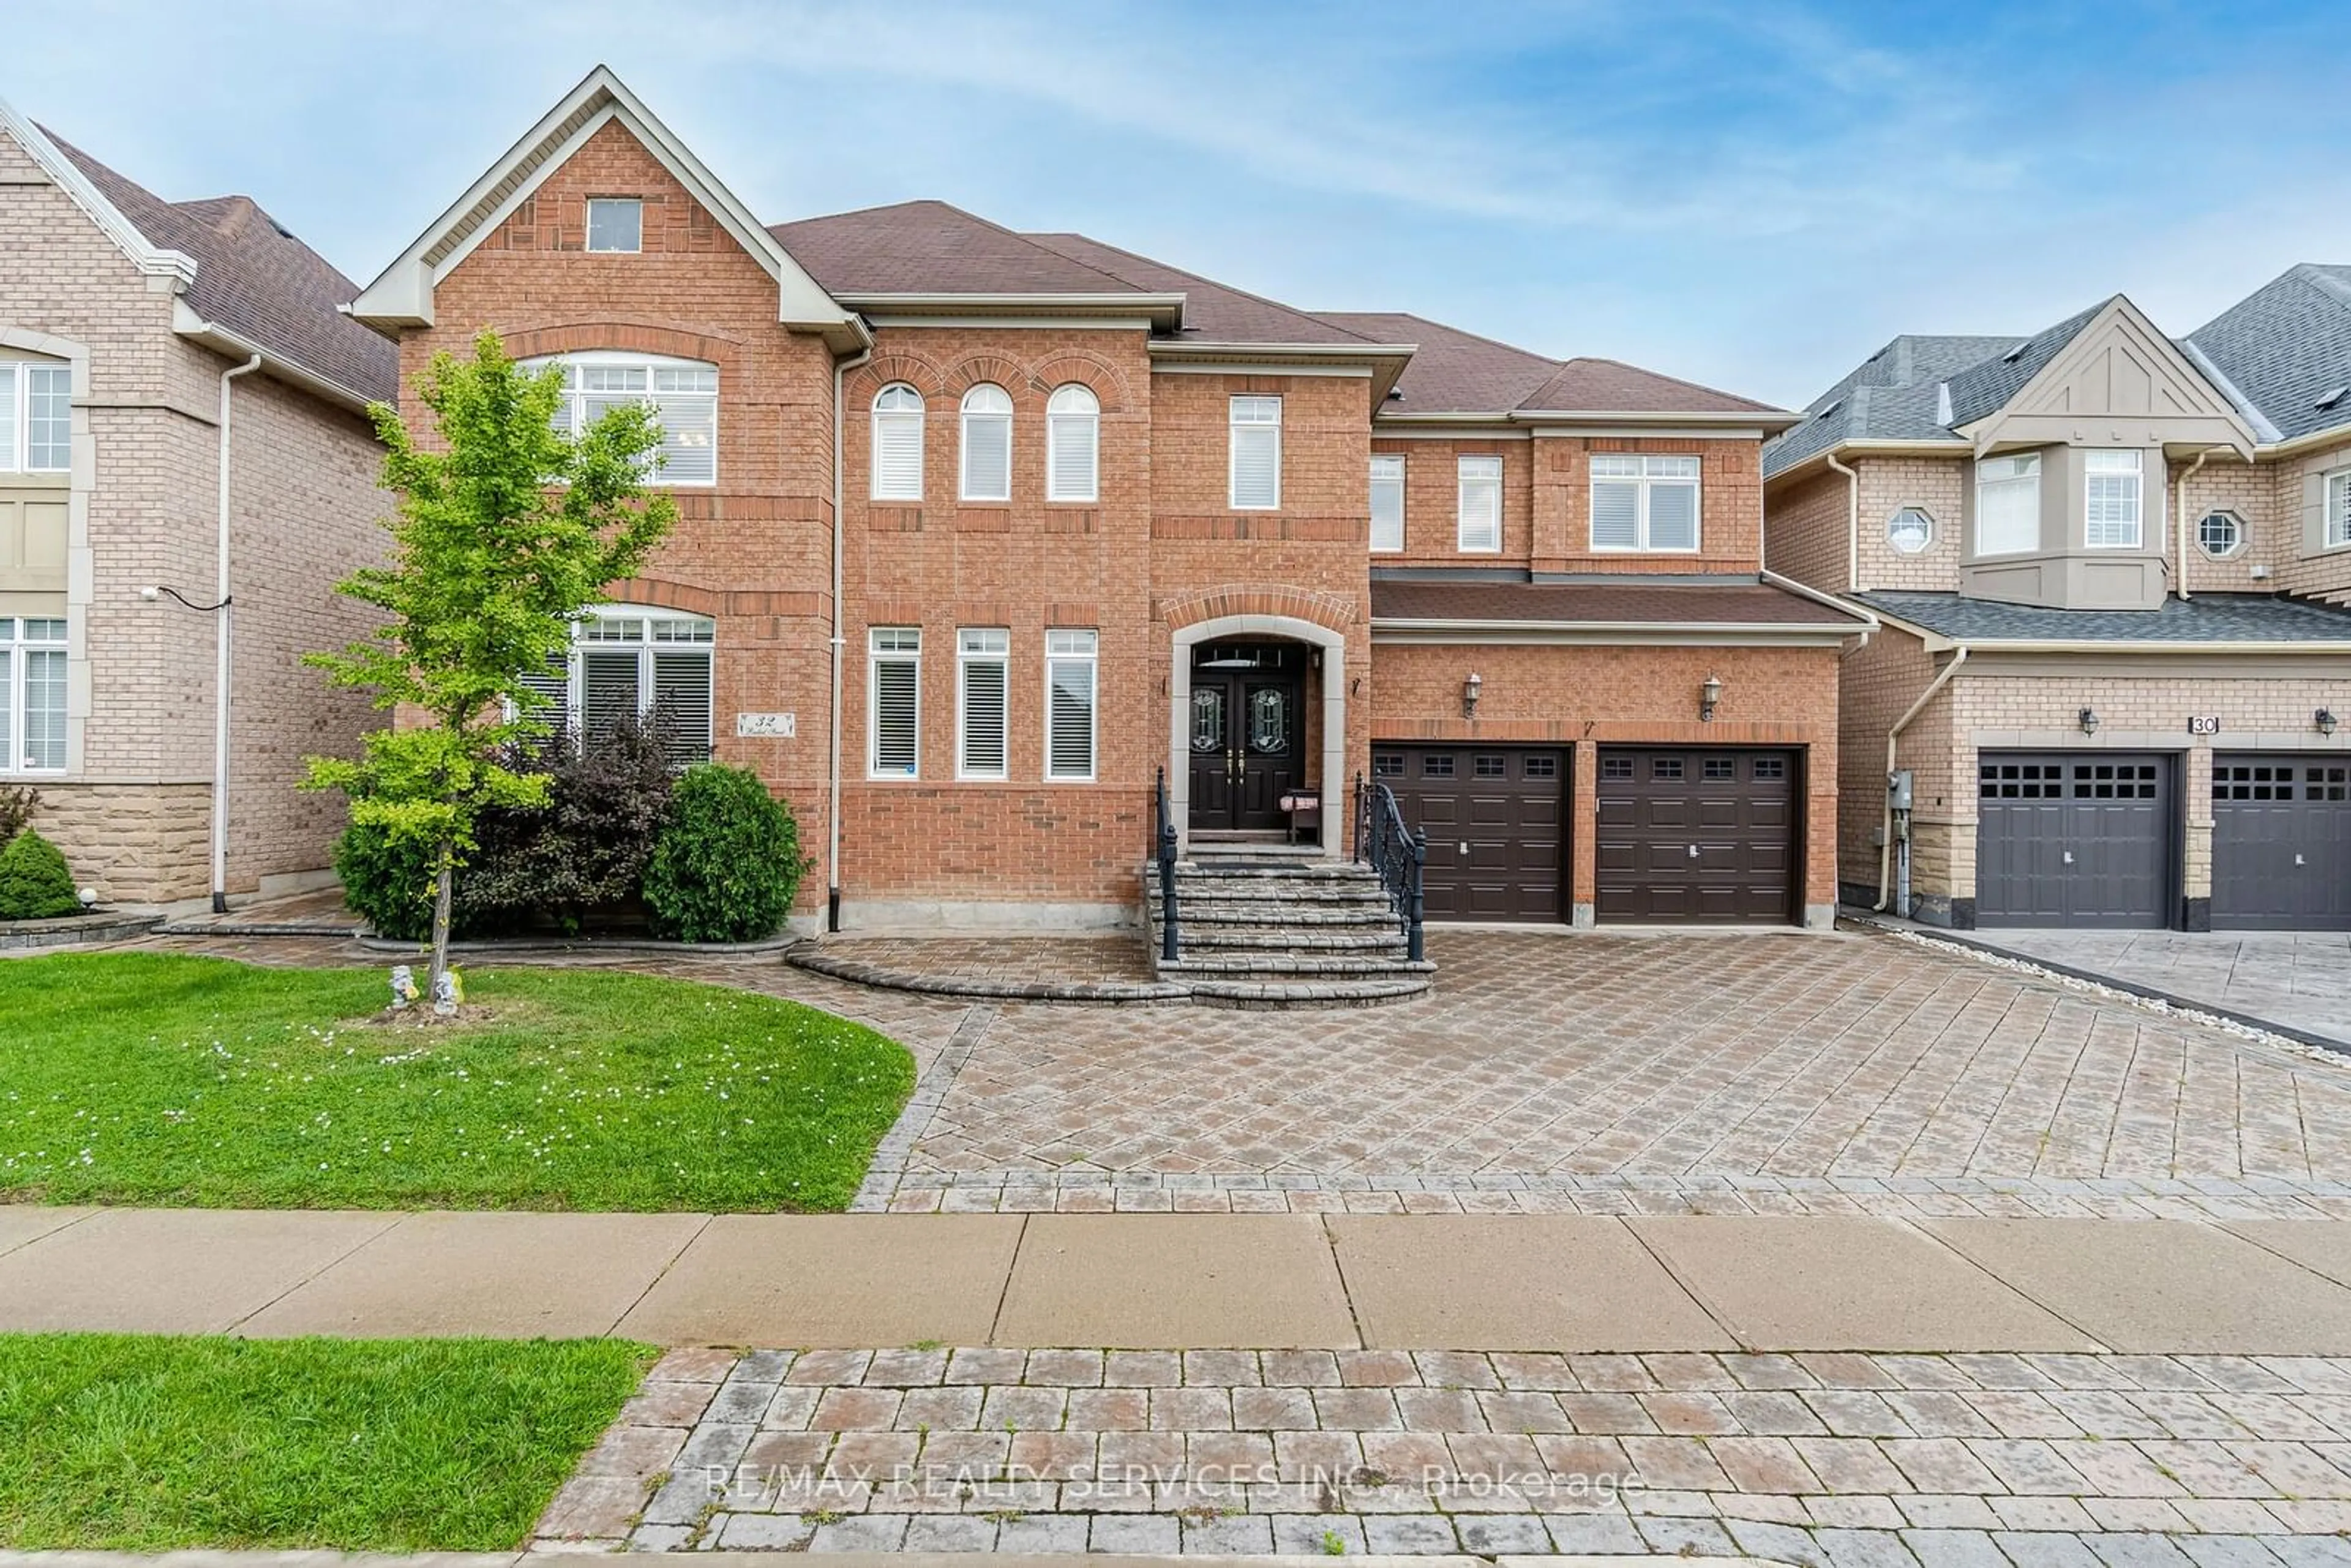 Home with brick exterior material for 32 Radial St, Brampton Ontario L6Y 5K7